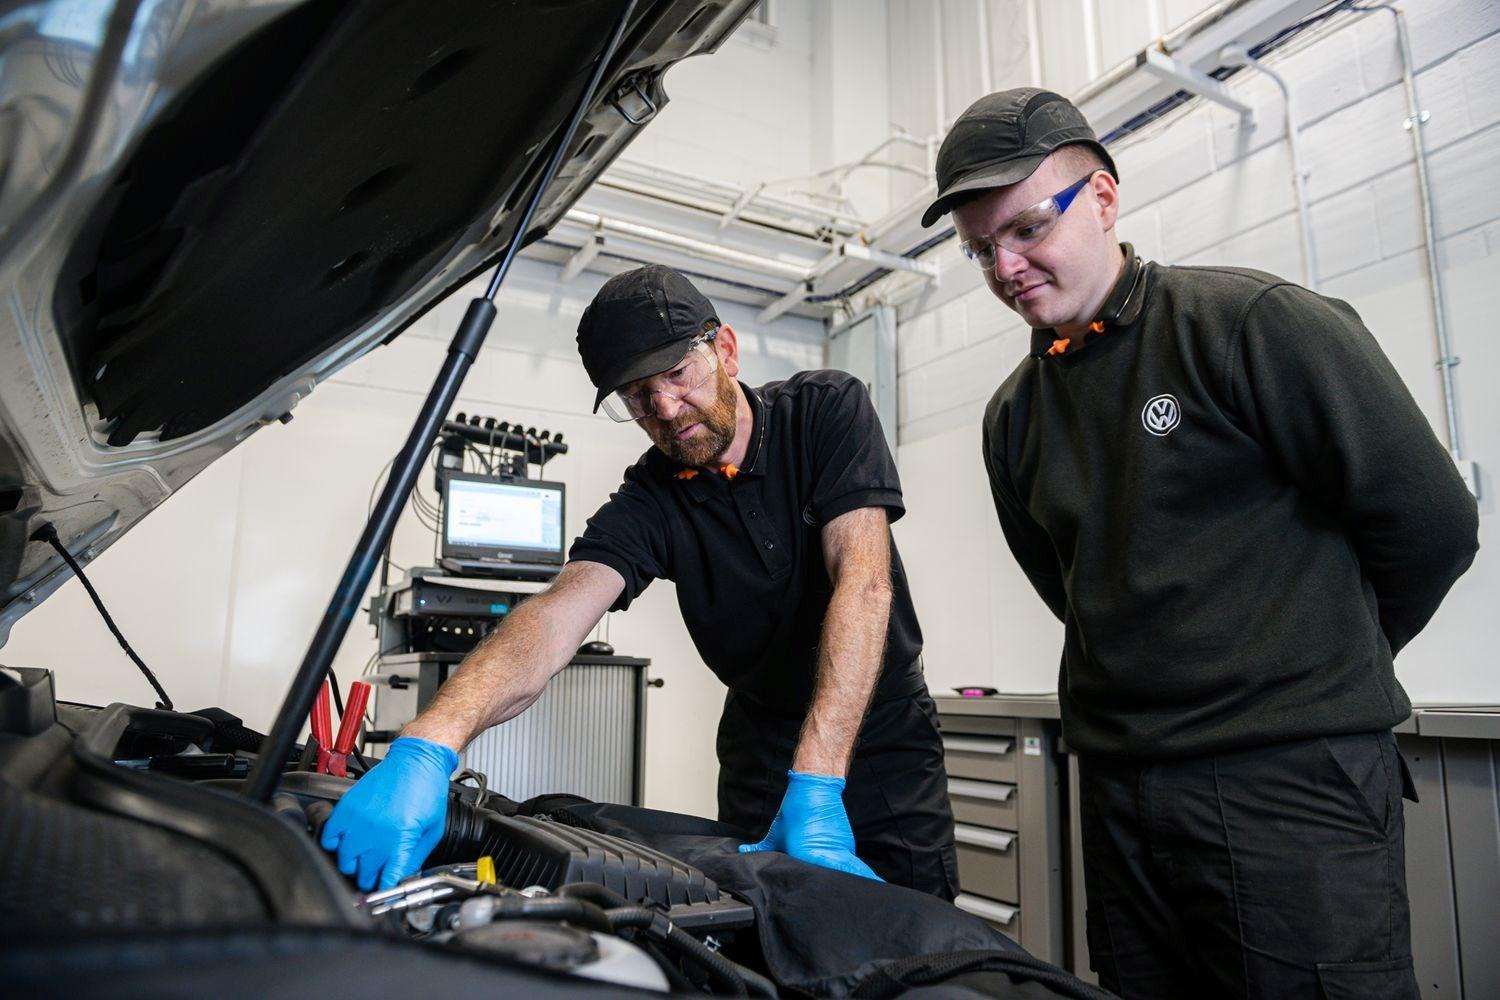 Two Volkswagen Mechanics inspect under the hood of a Volkswagen Golf during service at the Volkswagen Approved Accident Repair Centre, Agnew Volkswagen Mallusk